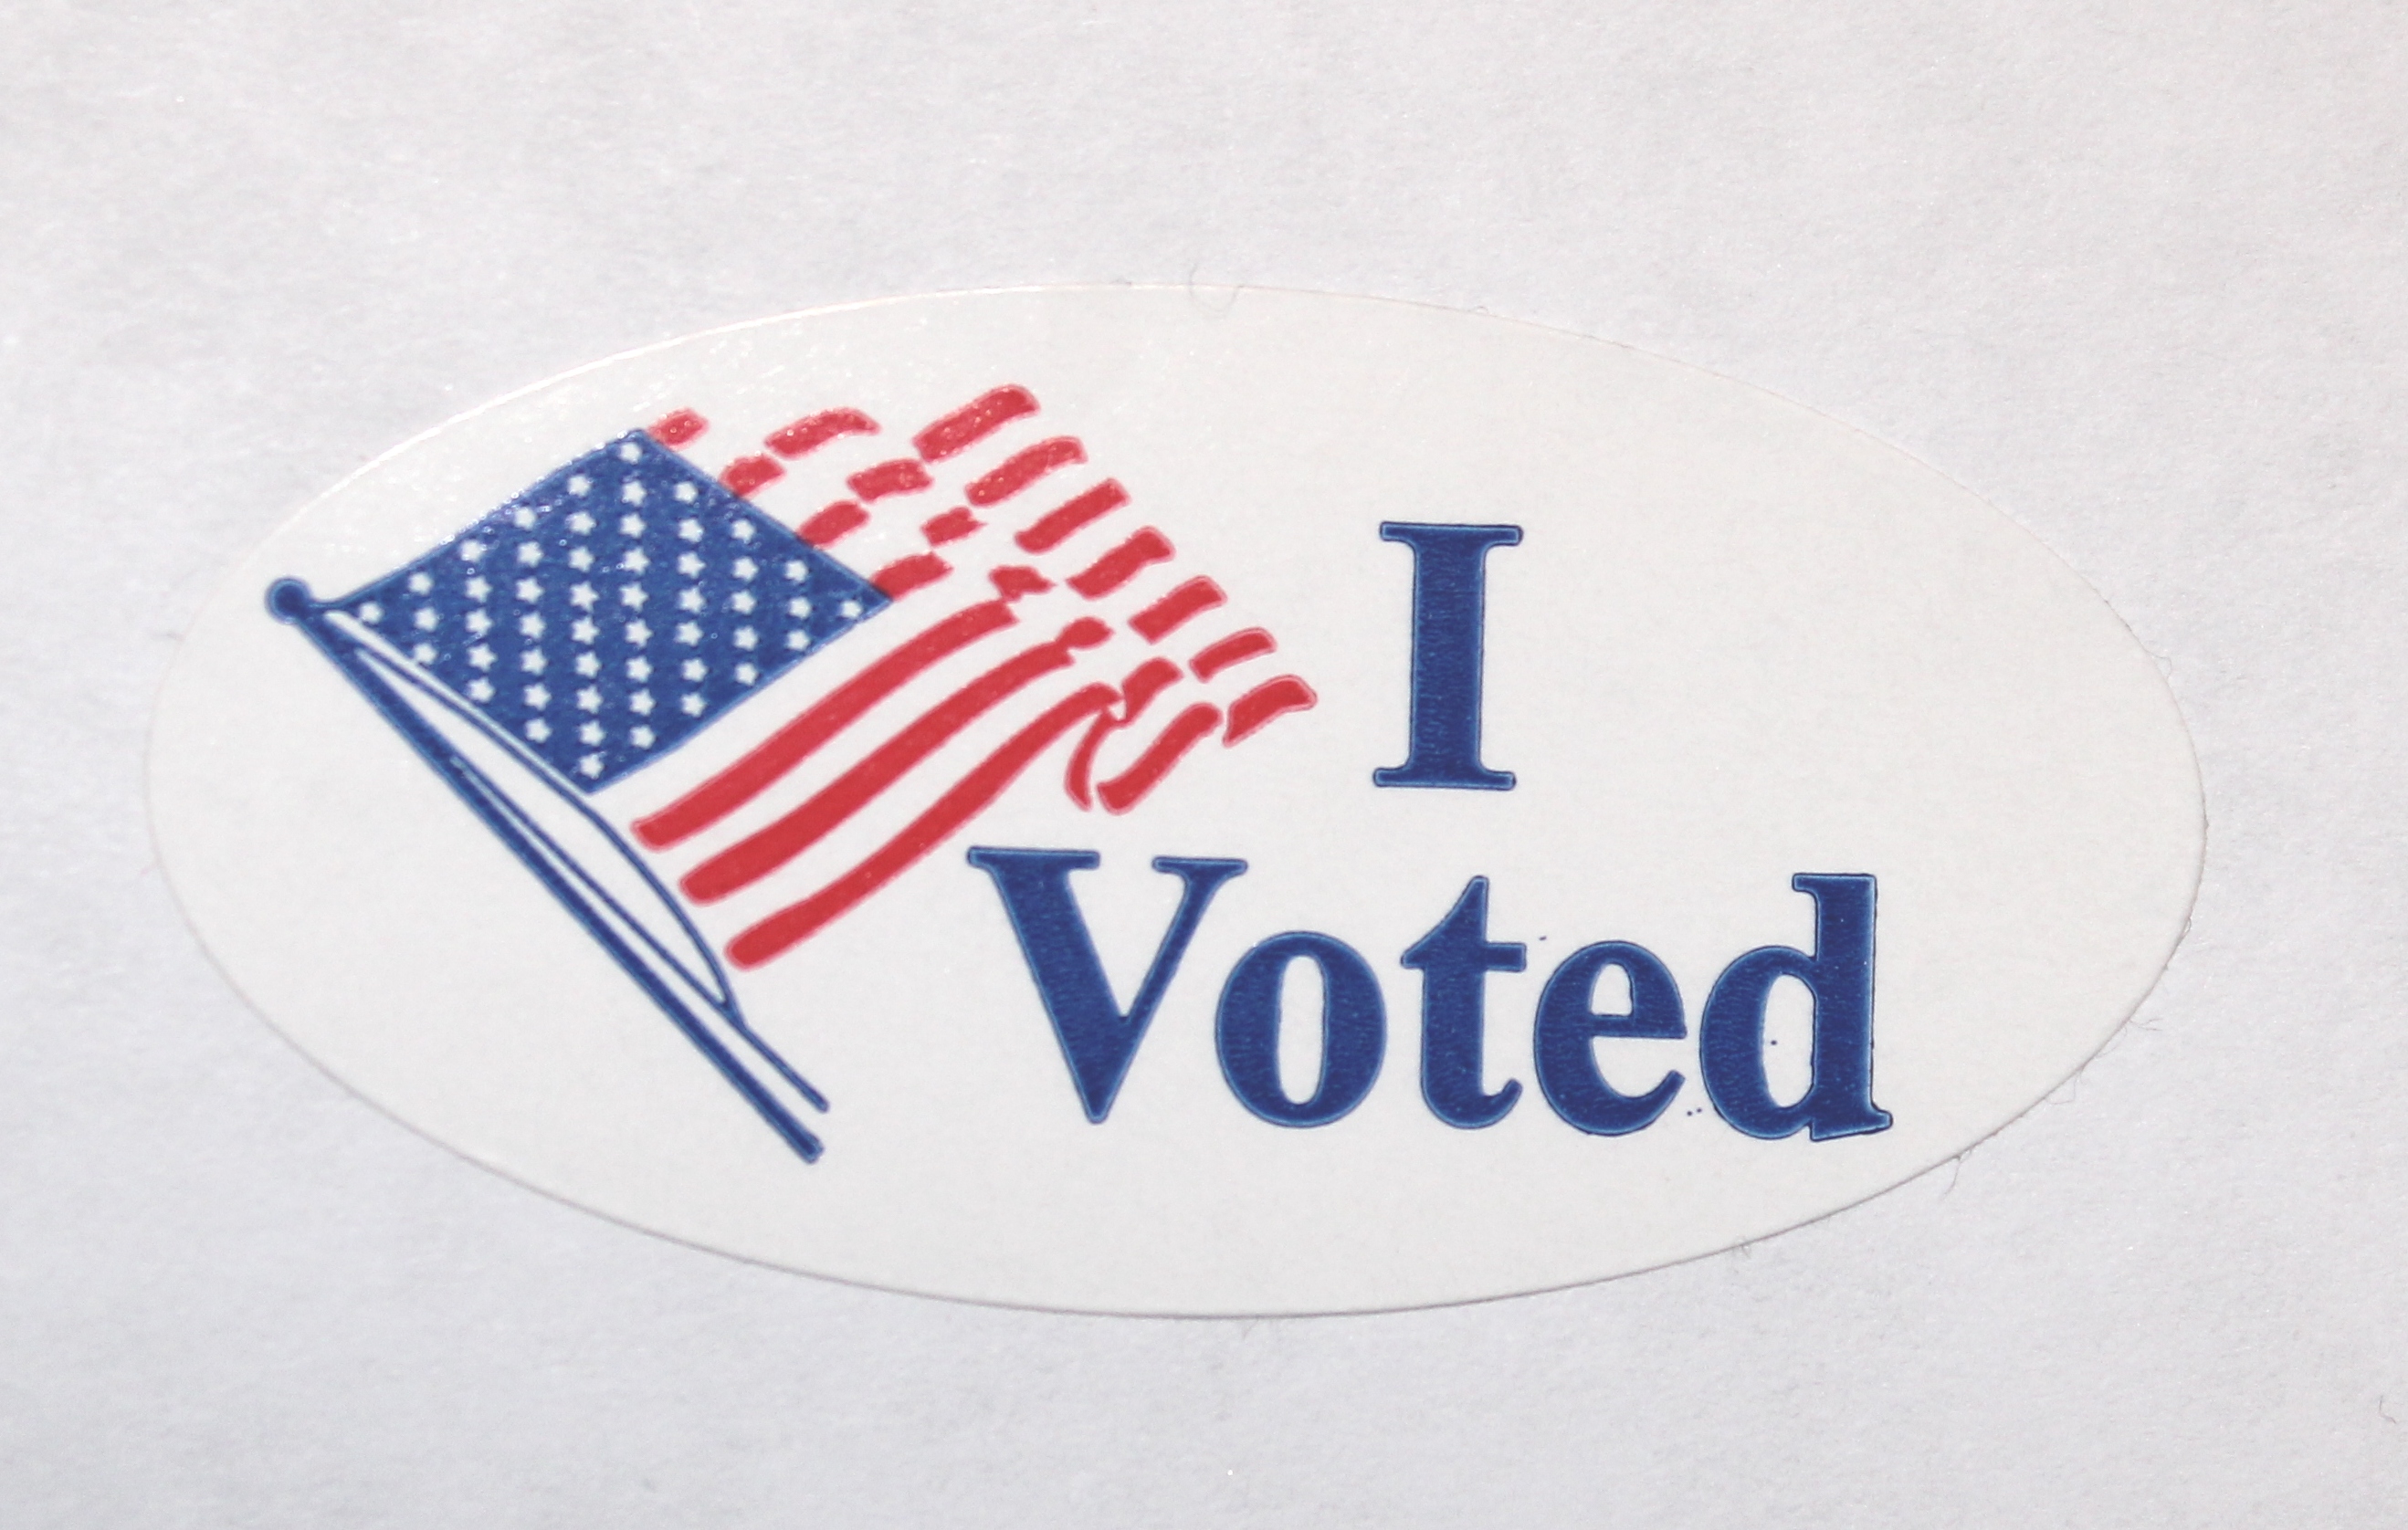 Did you get your I Voted sticker today? If not, you didn't vote.